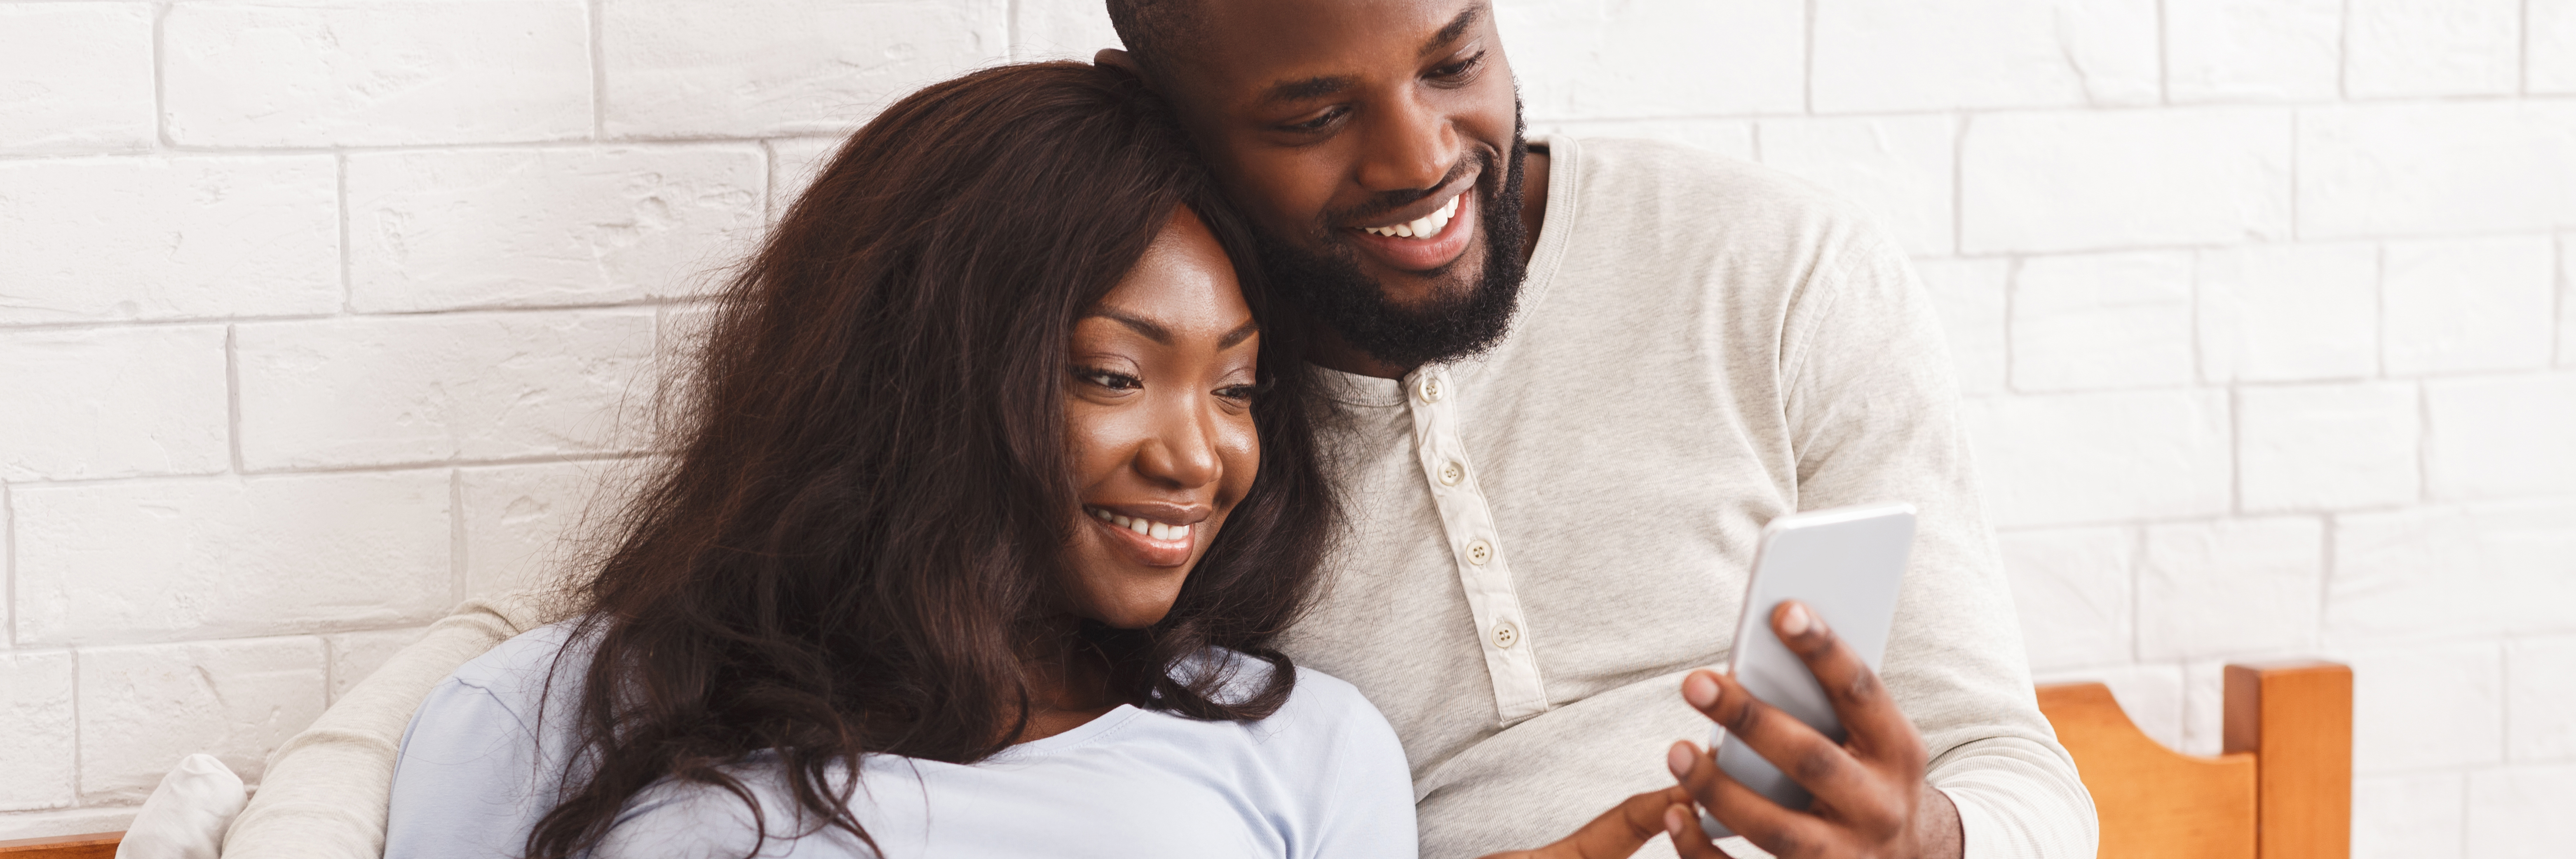 Two adults smile while looking at a mobile device.